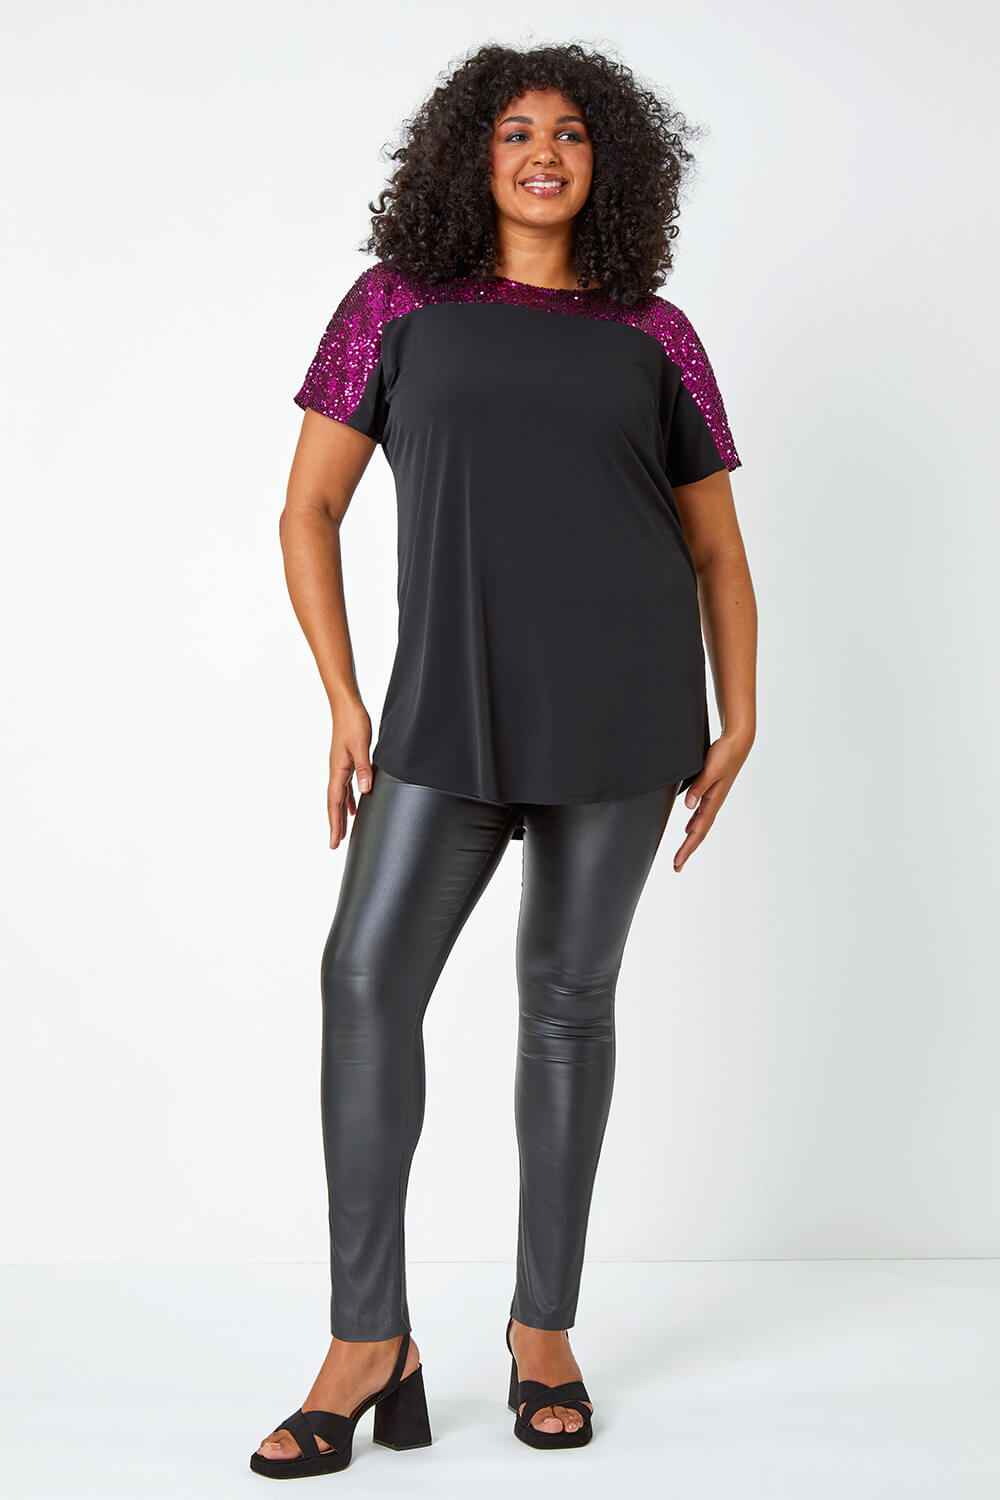 Fuchsia Curve Sequin Embellished Stretch Top, Image 2 of 7